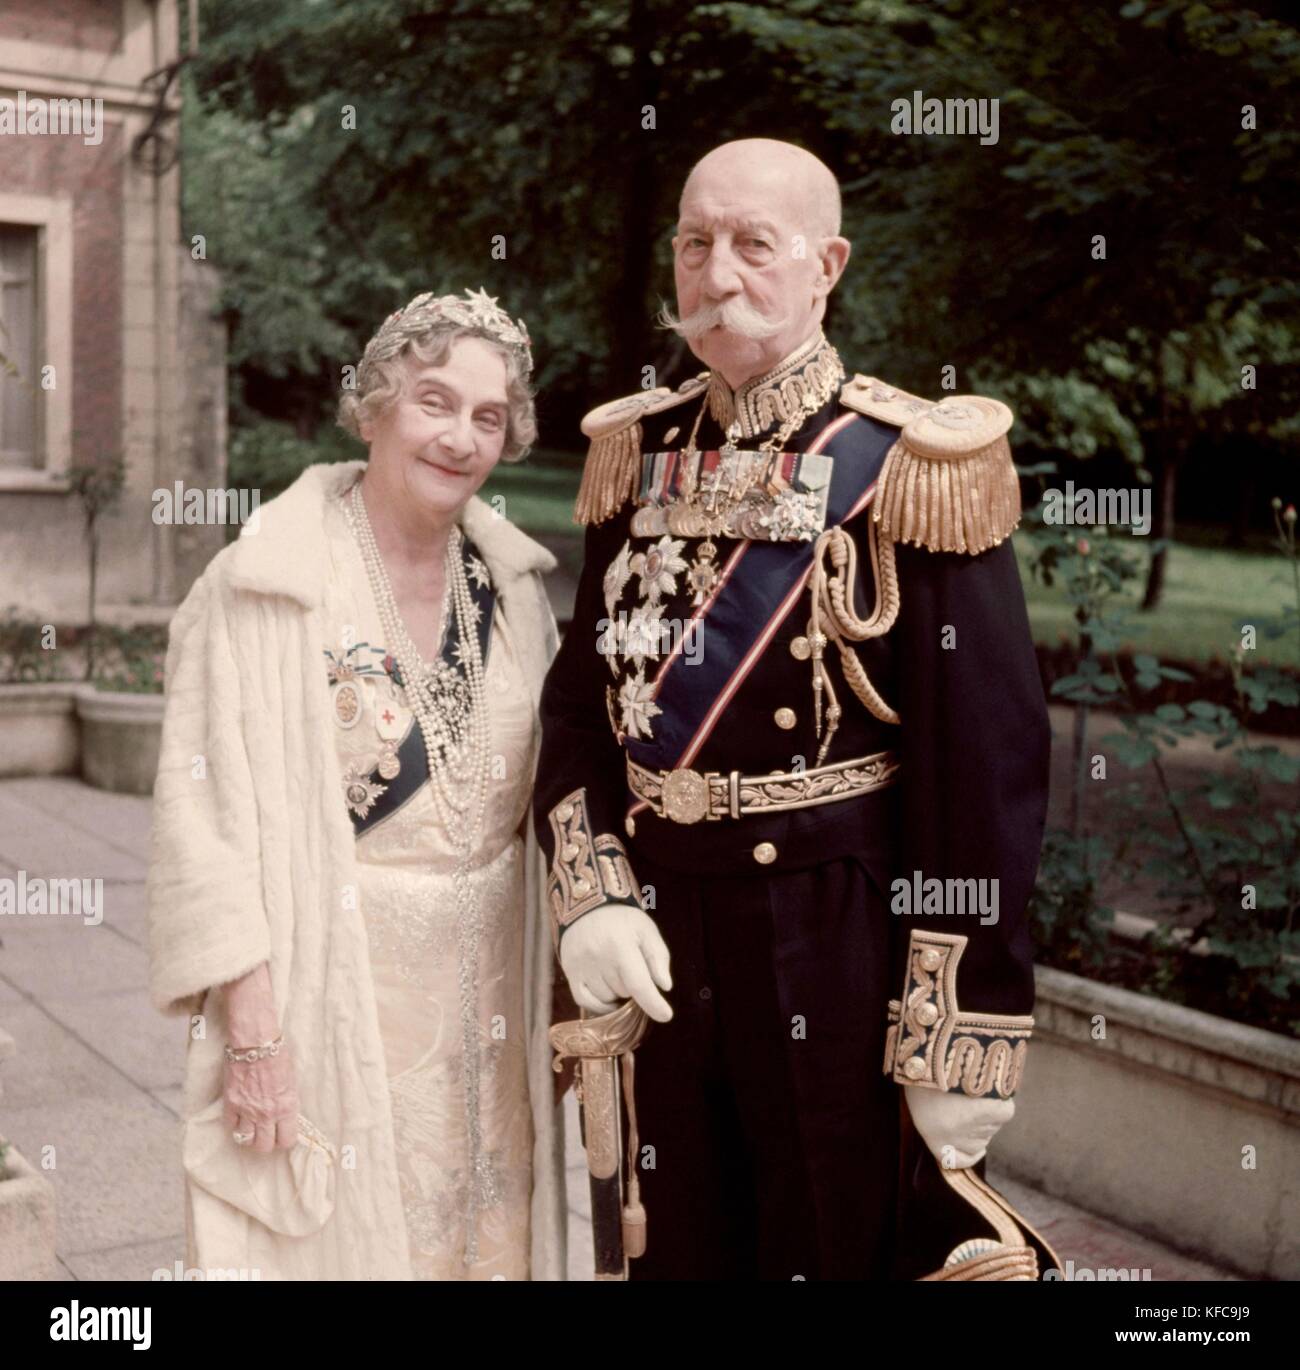 Prince George of Greece and of Denmark (1869-1957) and his wife Princess Marie Bonapart (1882-1962) in court dress  Married in 1902  1953  Taponier Photo Photo12.com - Coll. Taponier Stock Photo